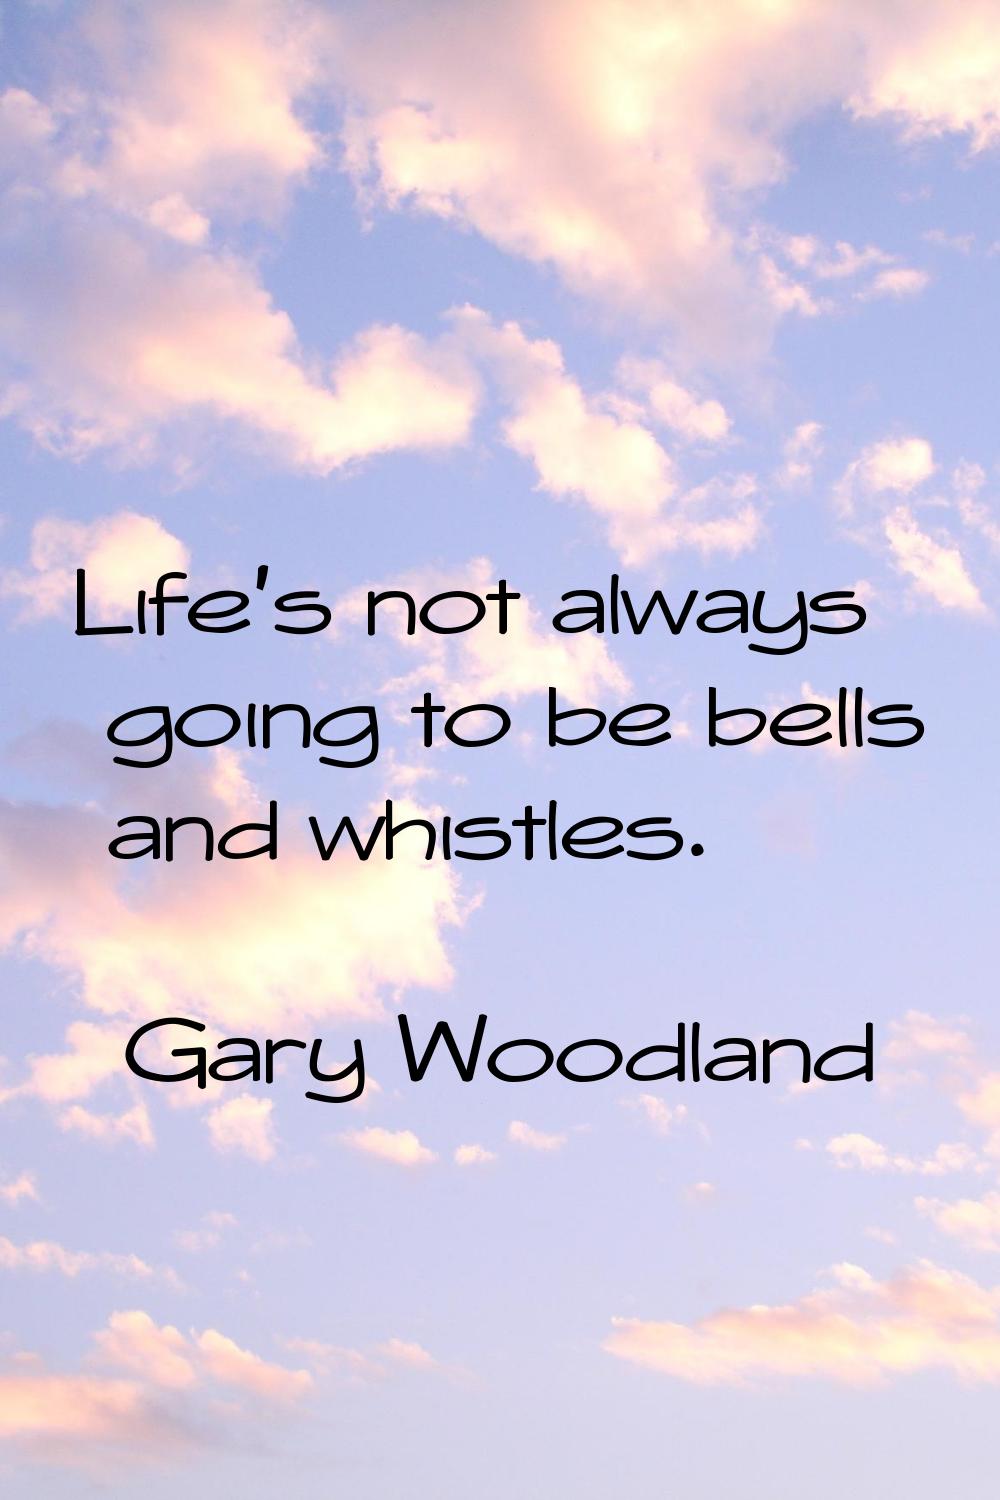 Life's not always going to be bells and whistles.